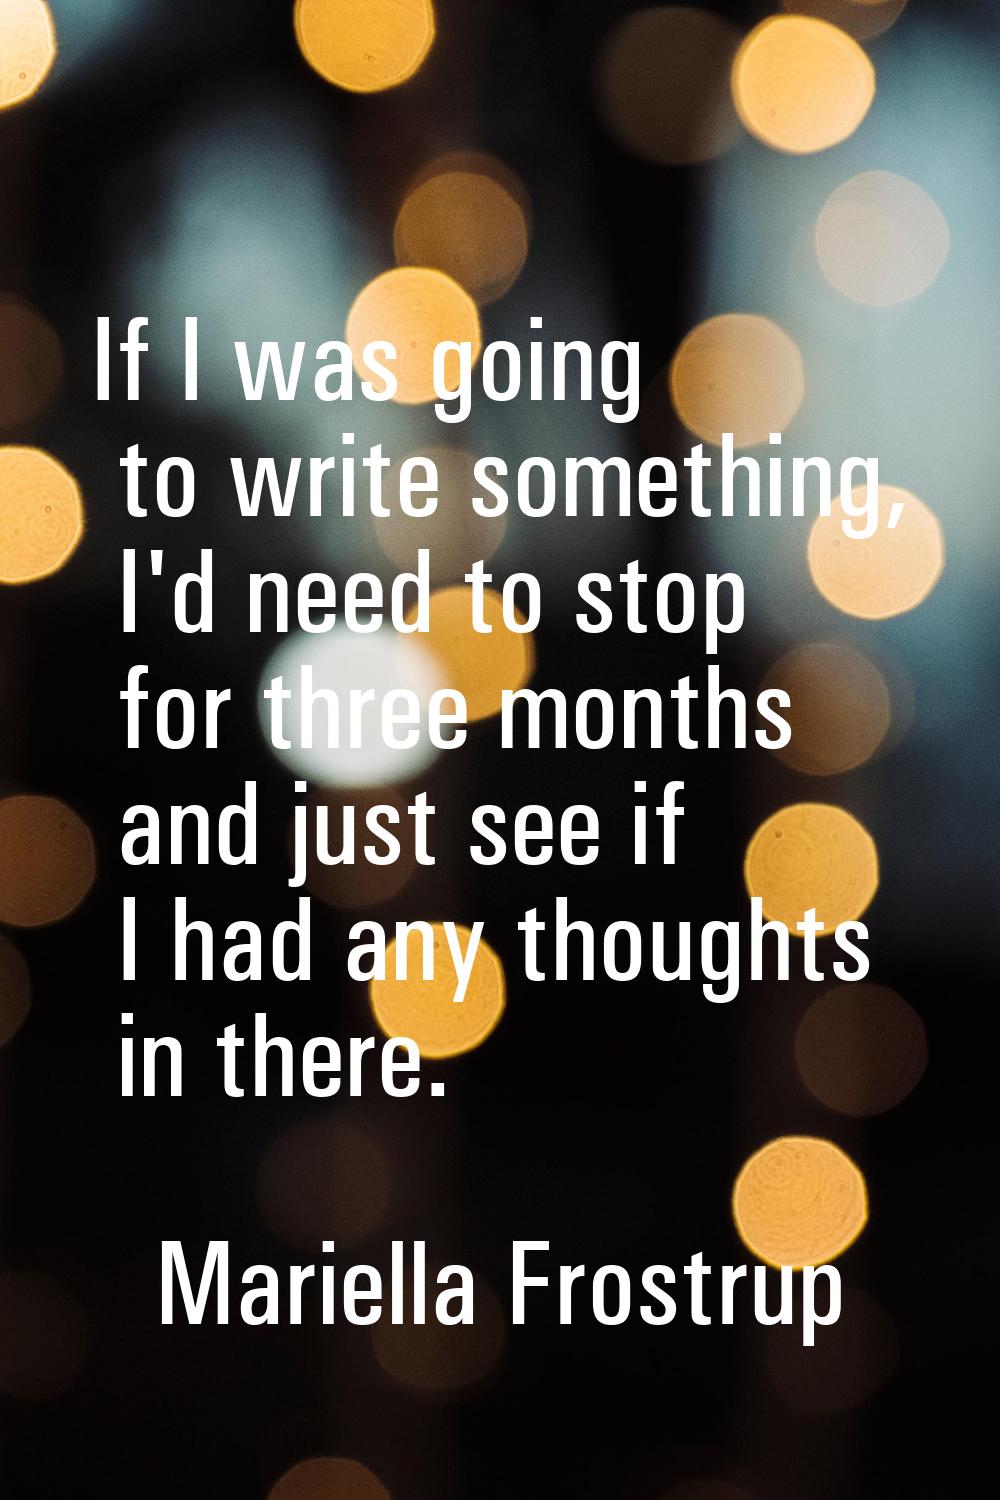 If I was going to write something, I'd need to stop for three months and just see if I had any thou